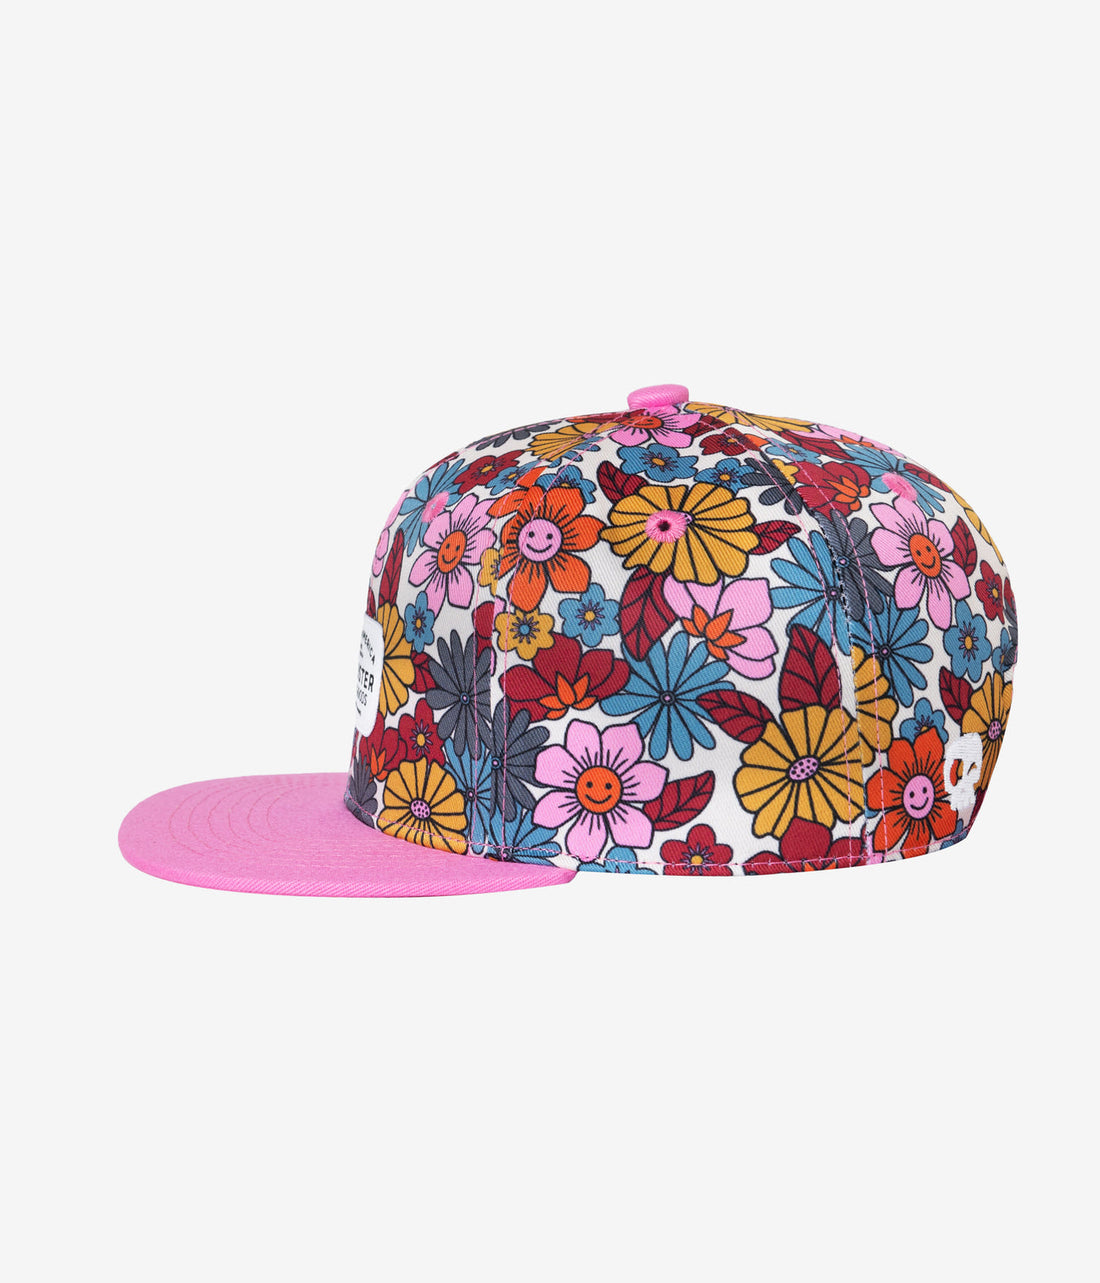 Sally Be Gone Snapback - pink